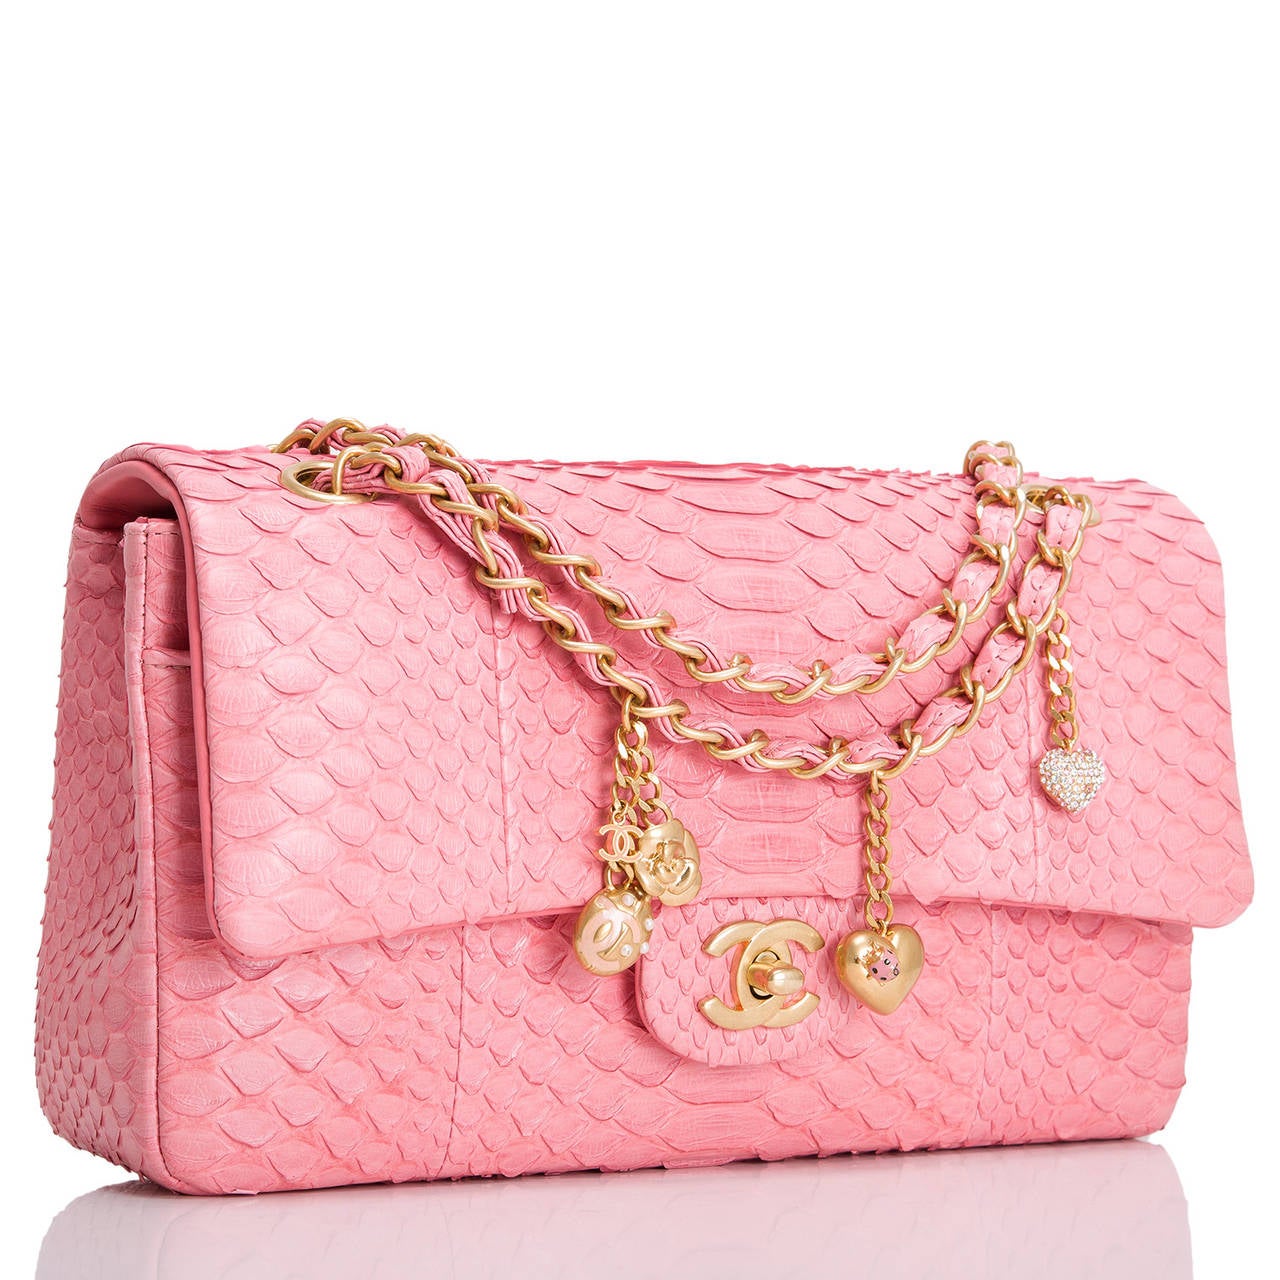 This pink python Chanel Large Charm Classic Flap features a front flap with signature CC turnlock closure, half moon back pocket and an adjustable interwoven aged gold tone chain link and pink python leather shoulder strap.

The interior is lined